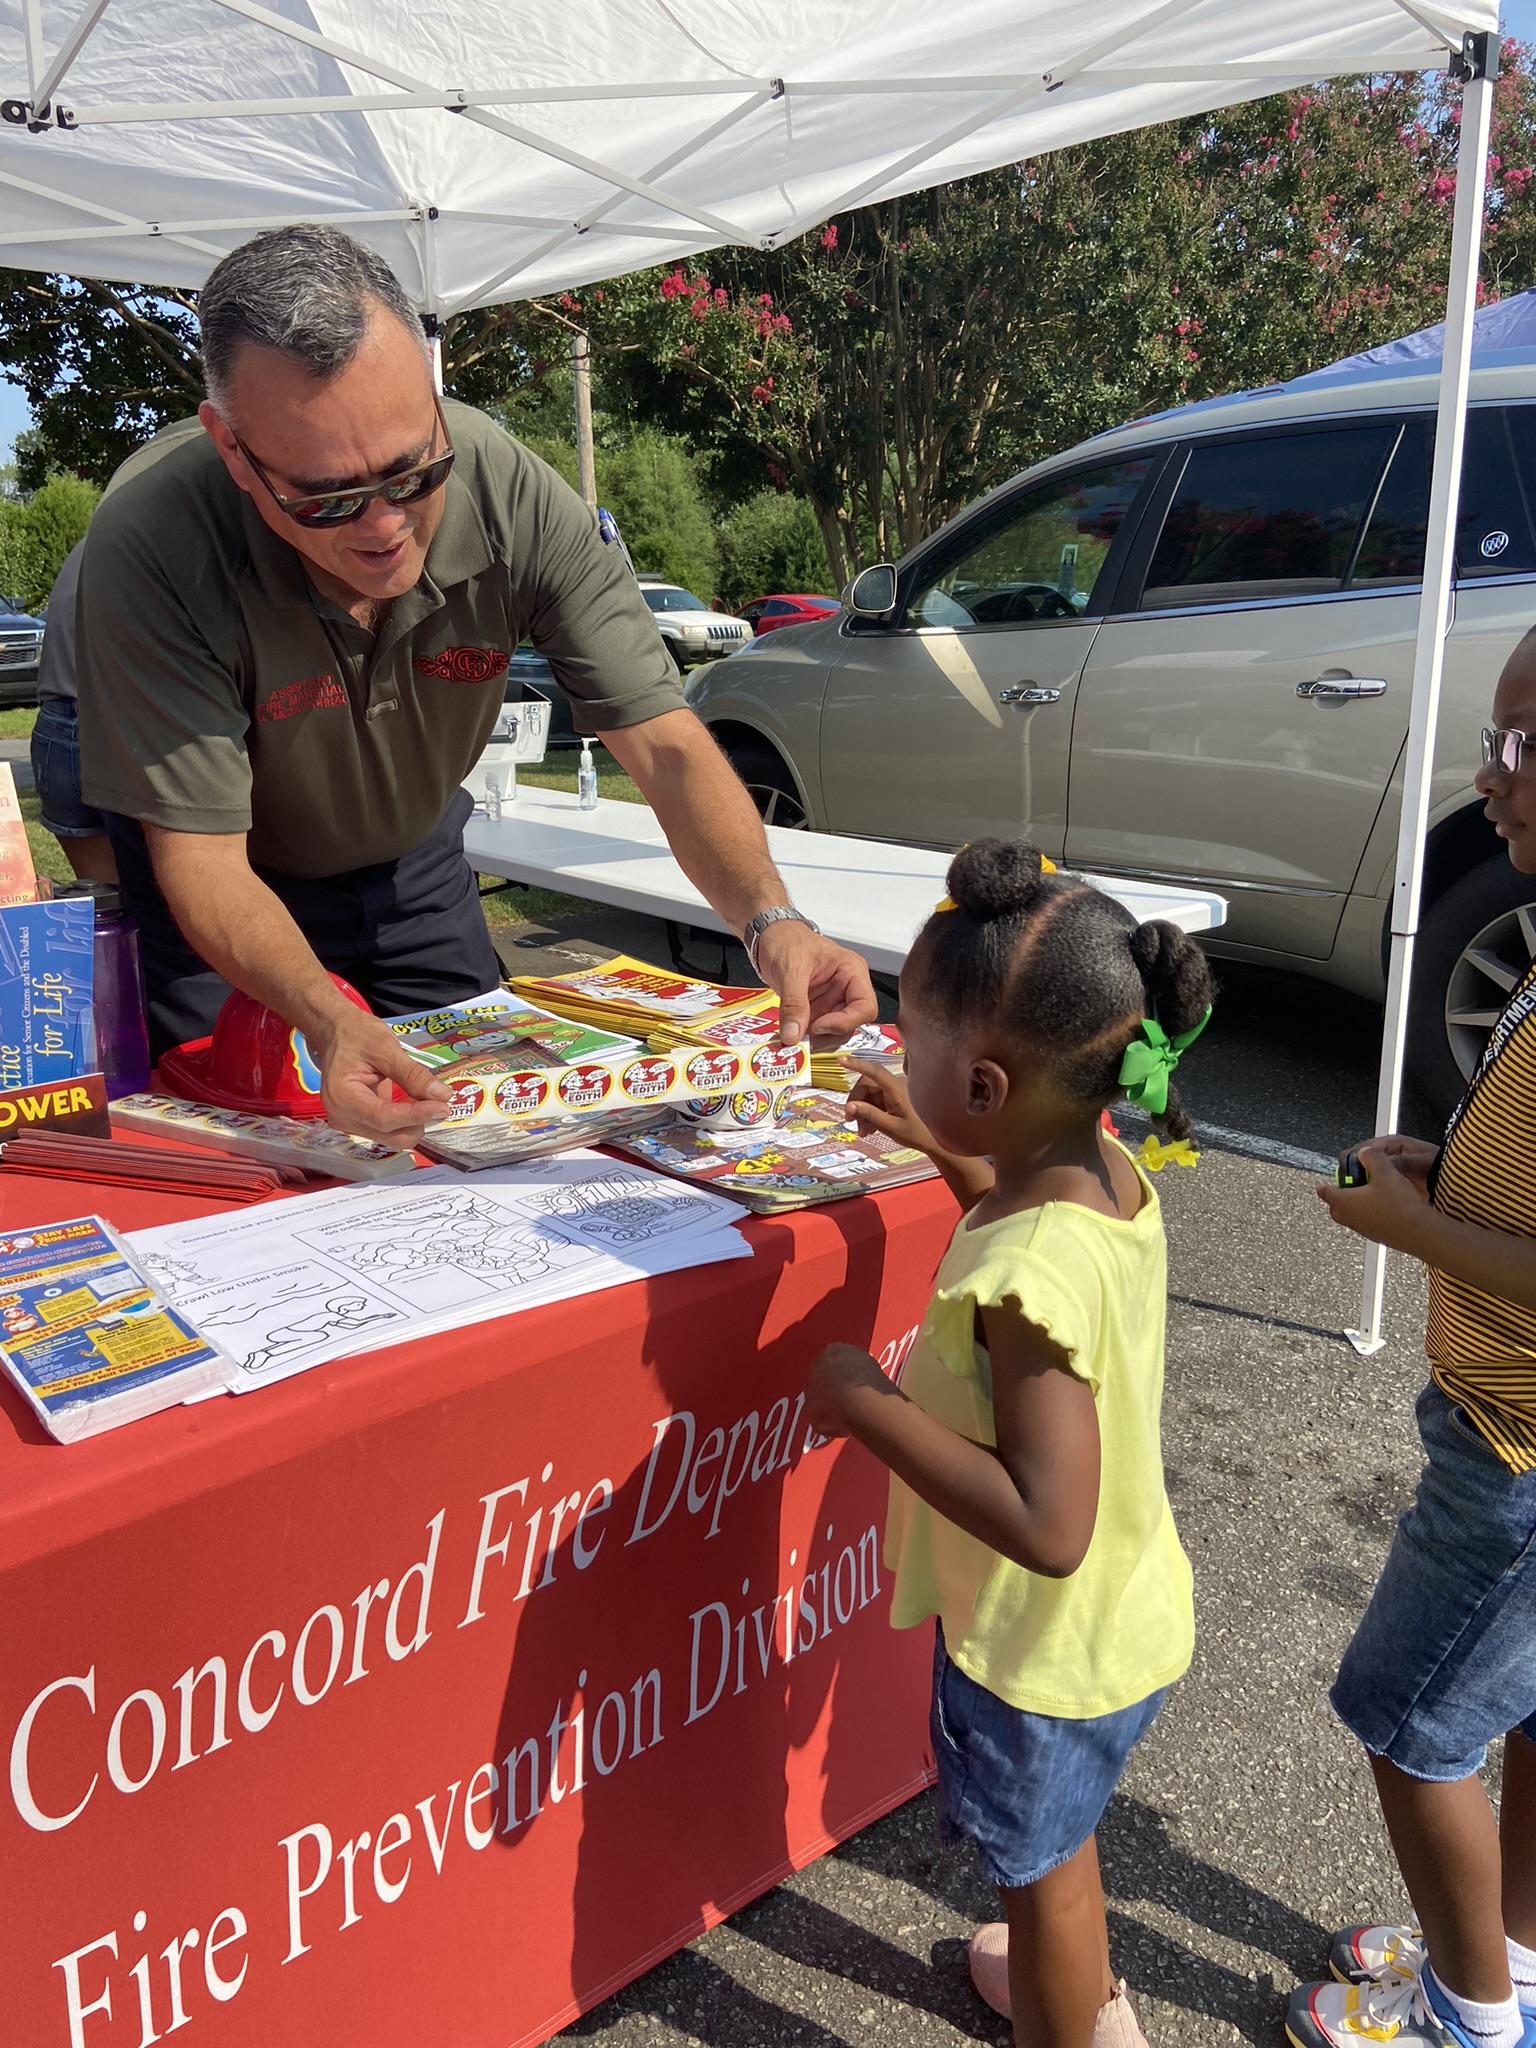 Concord Fire Prevention Booth